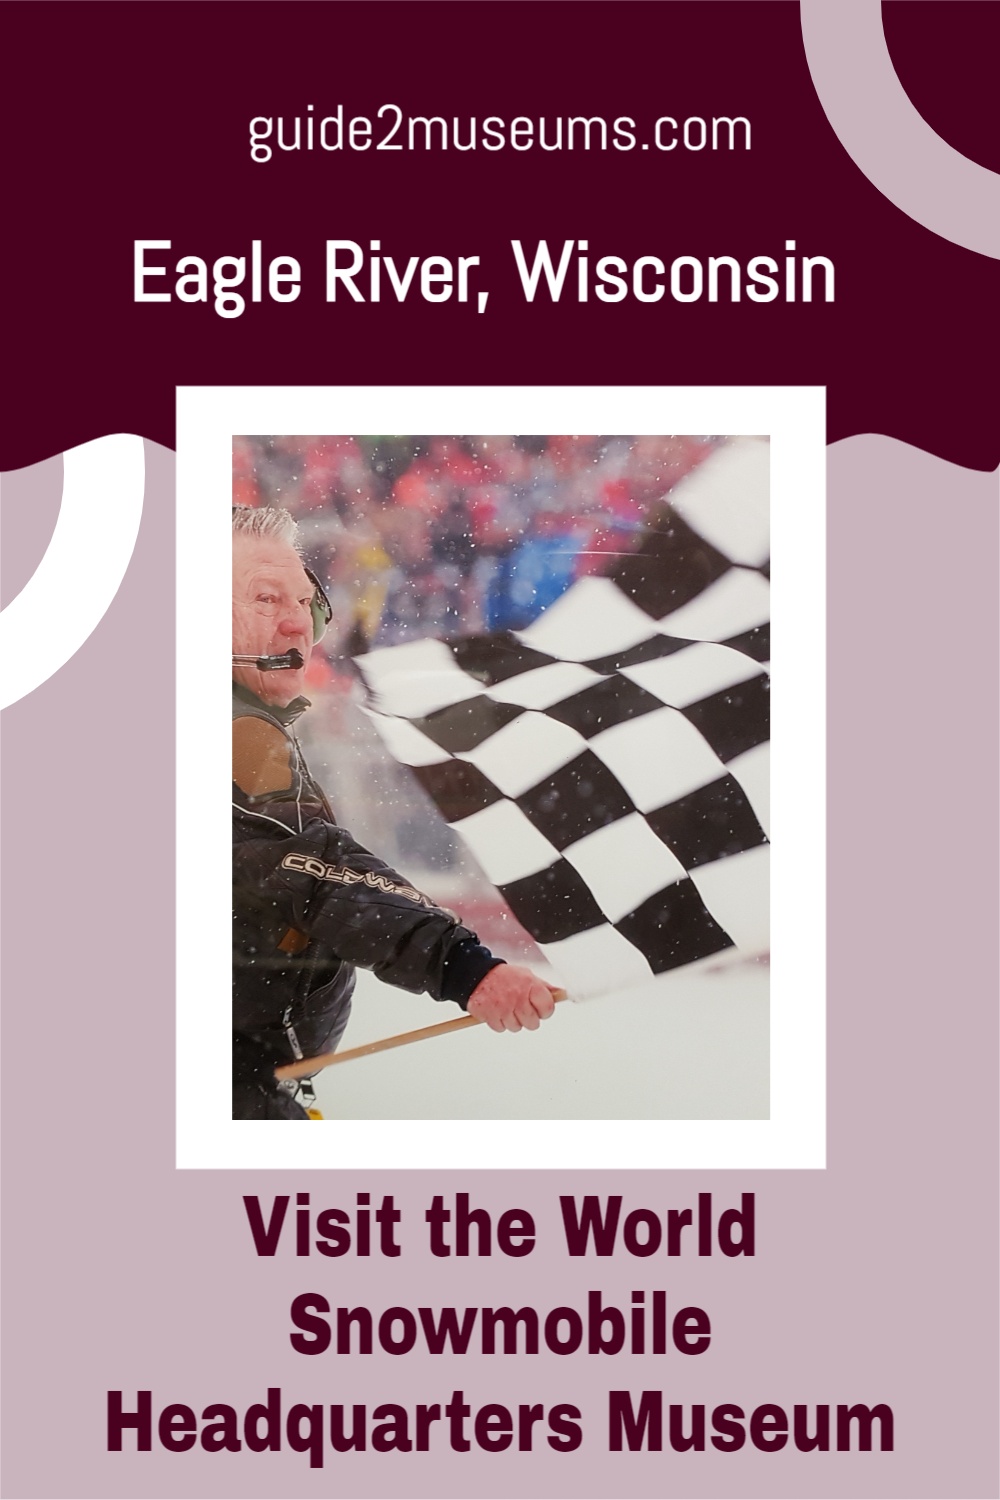 Visit the World Snowmobile Headquarters Museum | #travel #museums #EagleRiver #Wisconsin #snowmobiles #snowmobiling